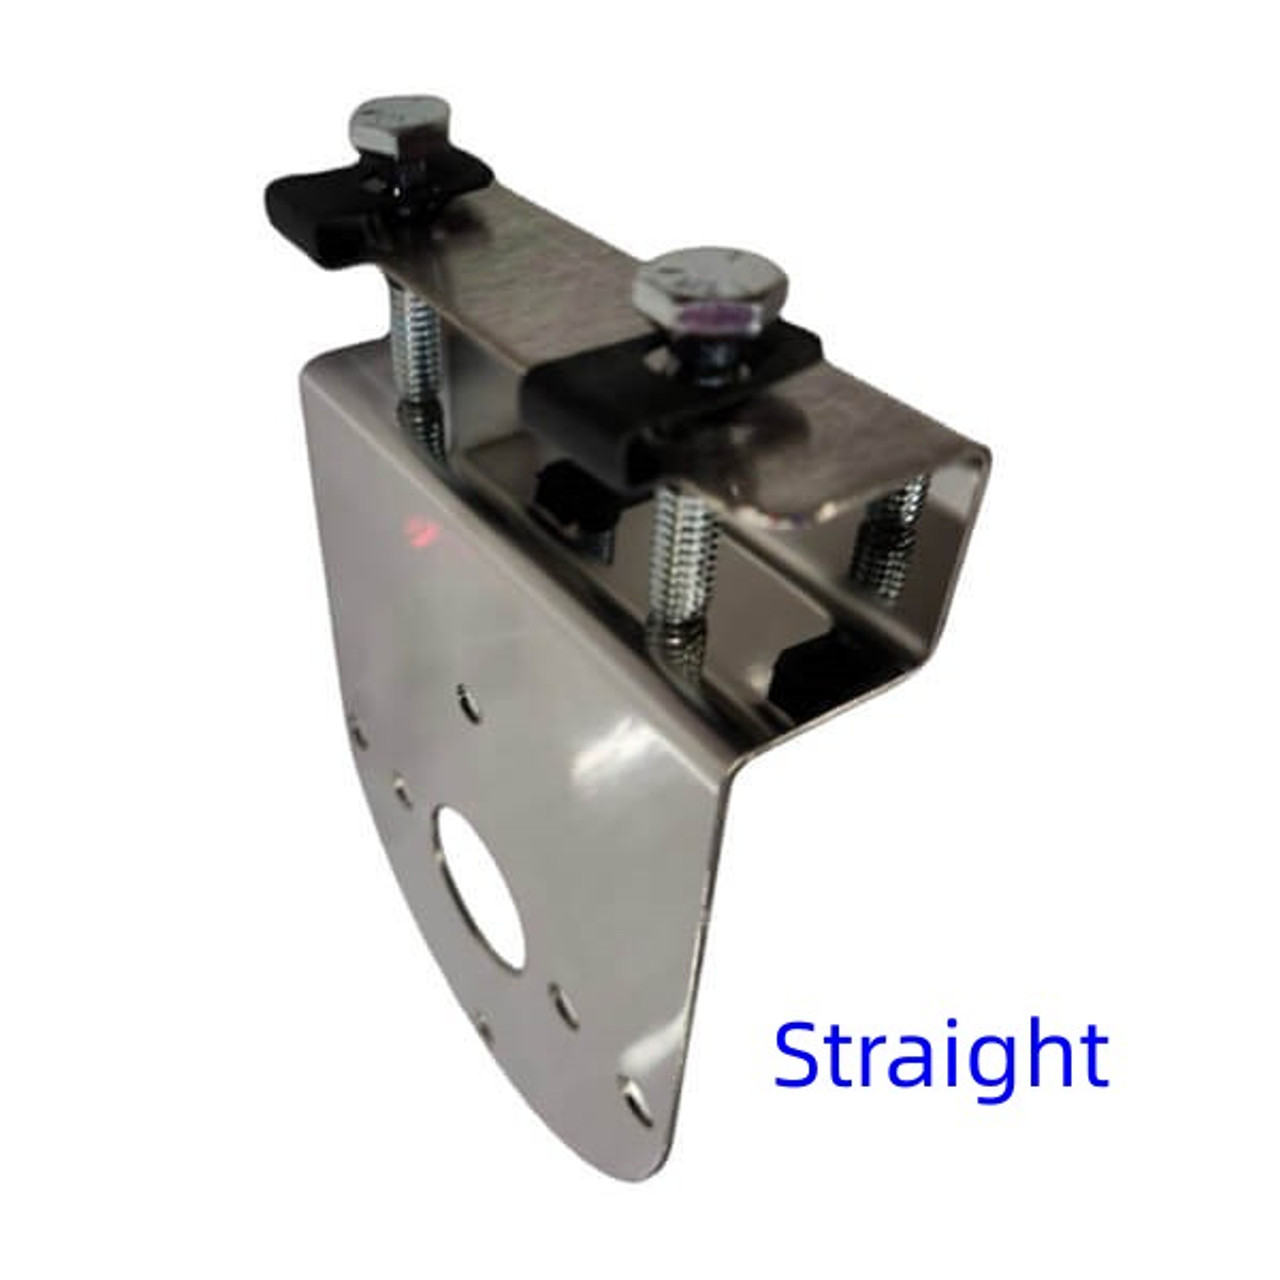 Straight or Angled Style Facing Out Universal Frame Bracket for Watermelon Light